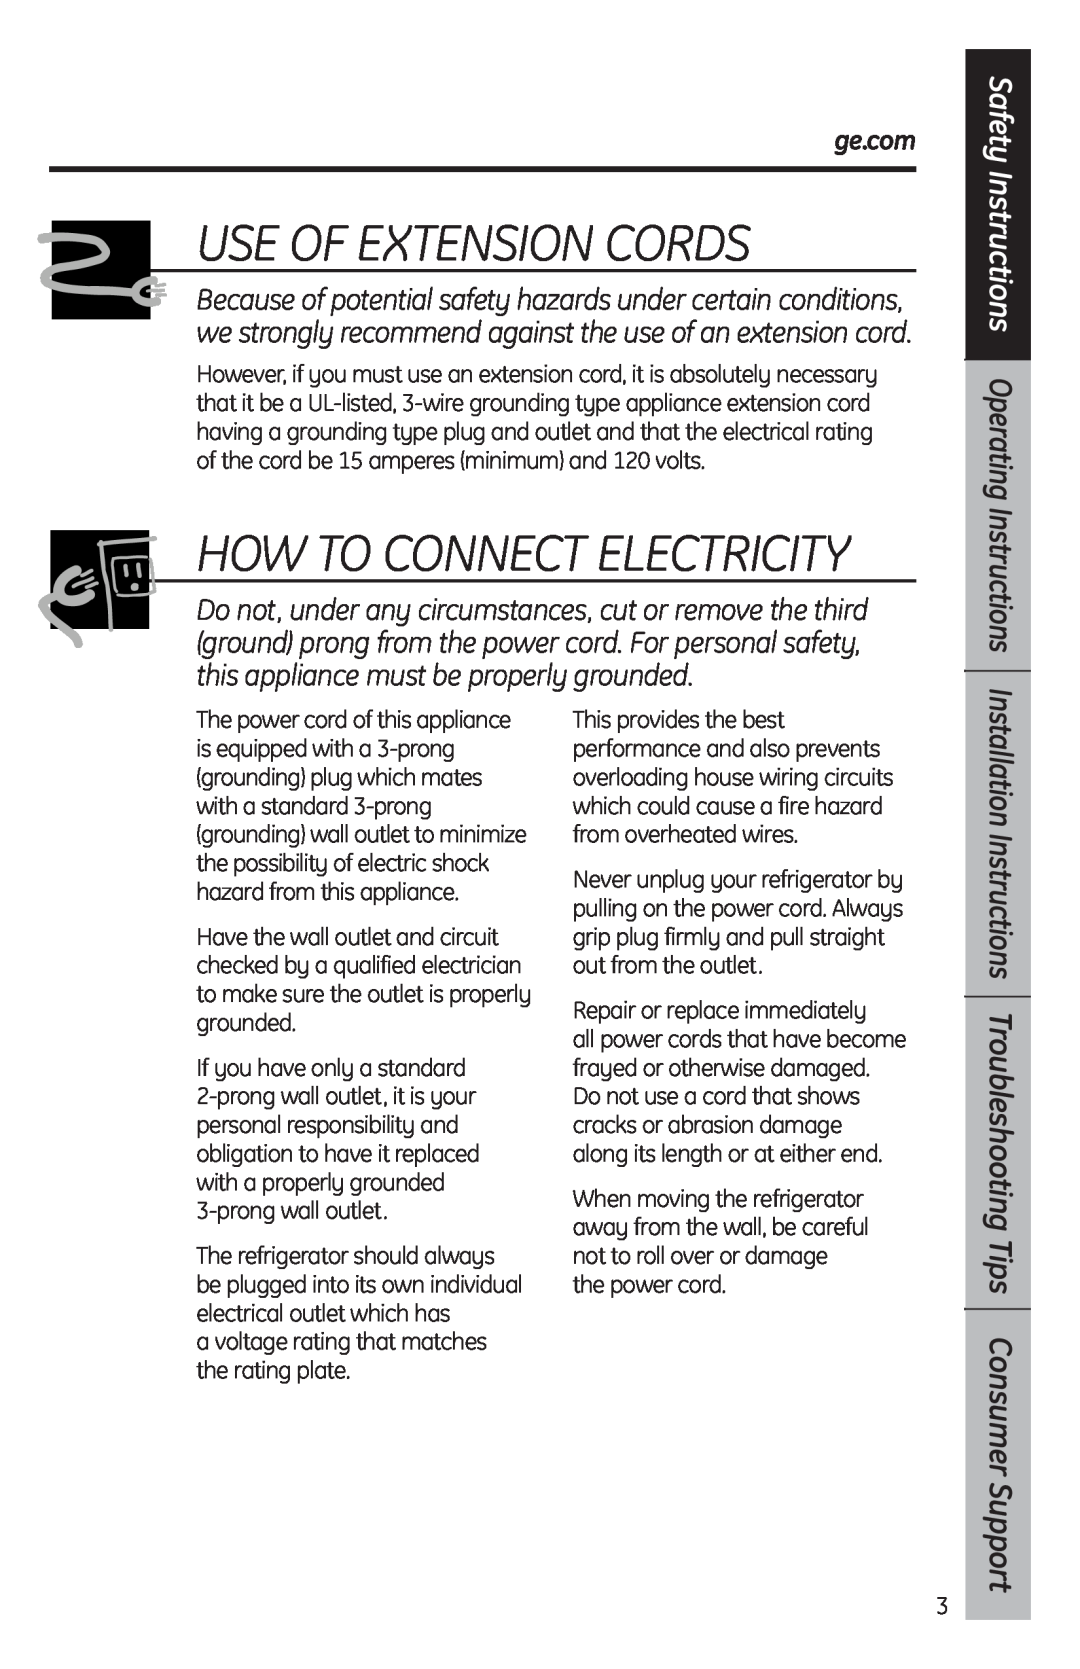 GE SMR03BAV Use Of Extension Cords, Safety Instructions Operating Instructions, ge.com, How To Connect Electricity 